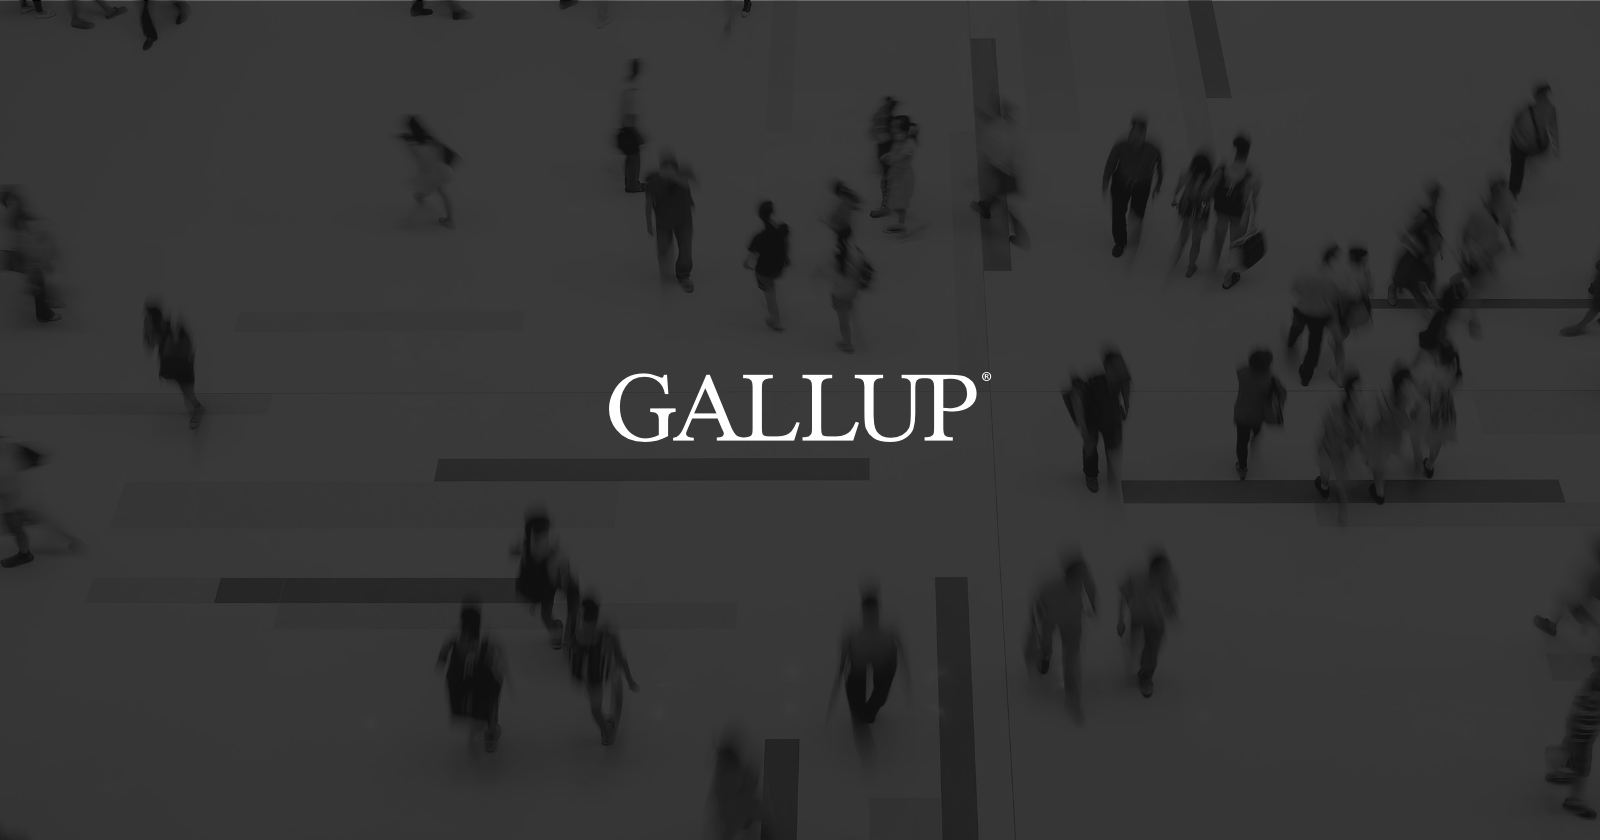 Trust in Government | Gallup Historical Trends